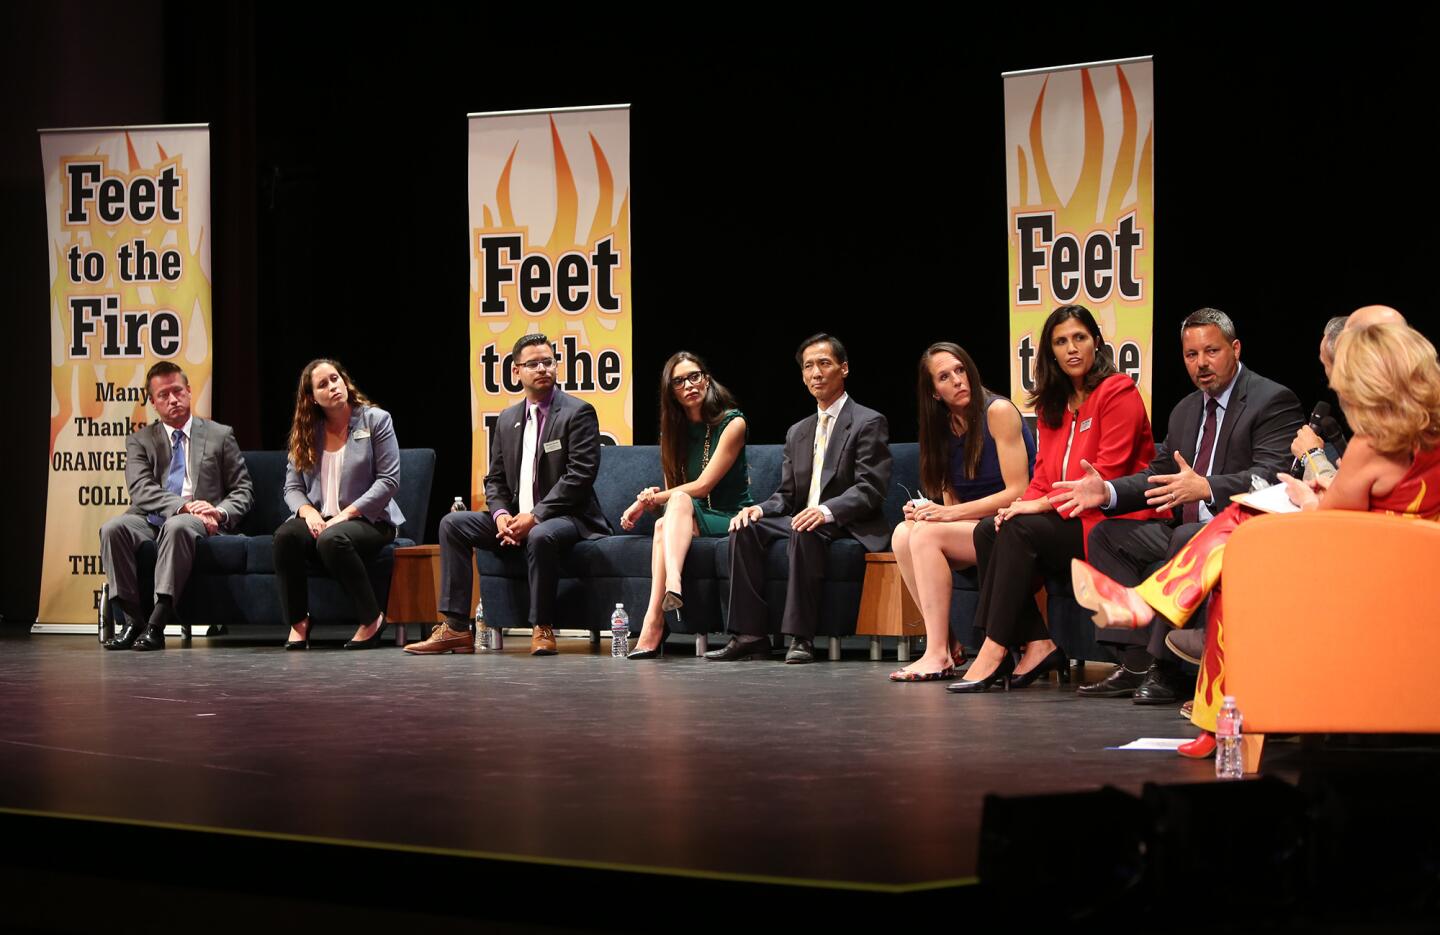 Costa Mesa City Council candidates answer questions about the homelessness issue during Monday night's Feet to the Fire forum in the Robert B. Moore Theatre at Orange Coast College.